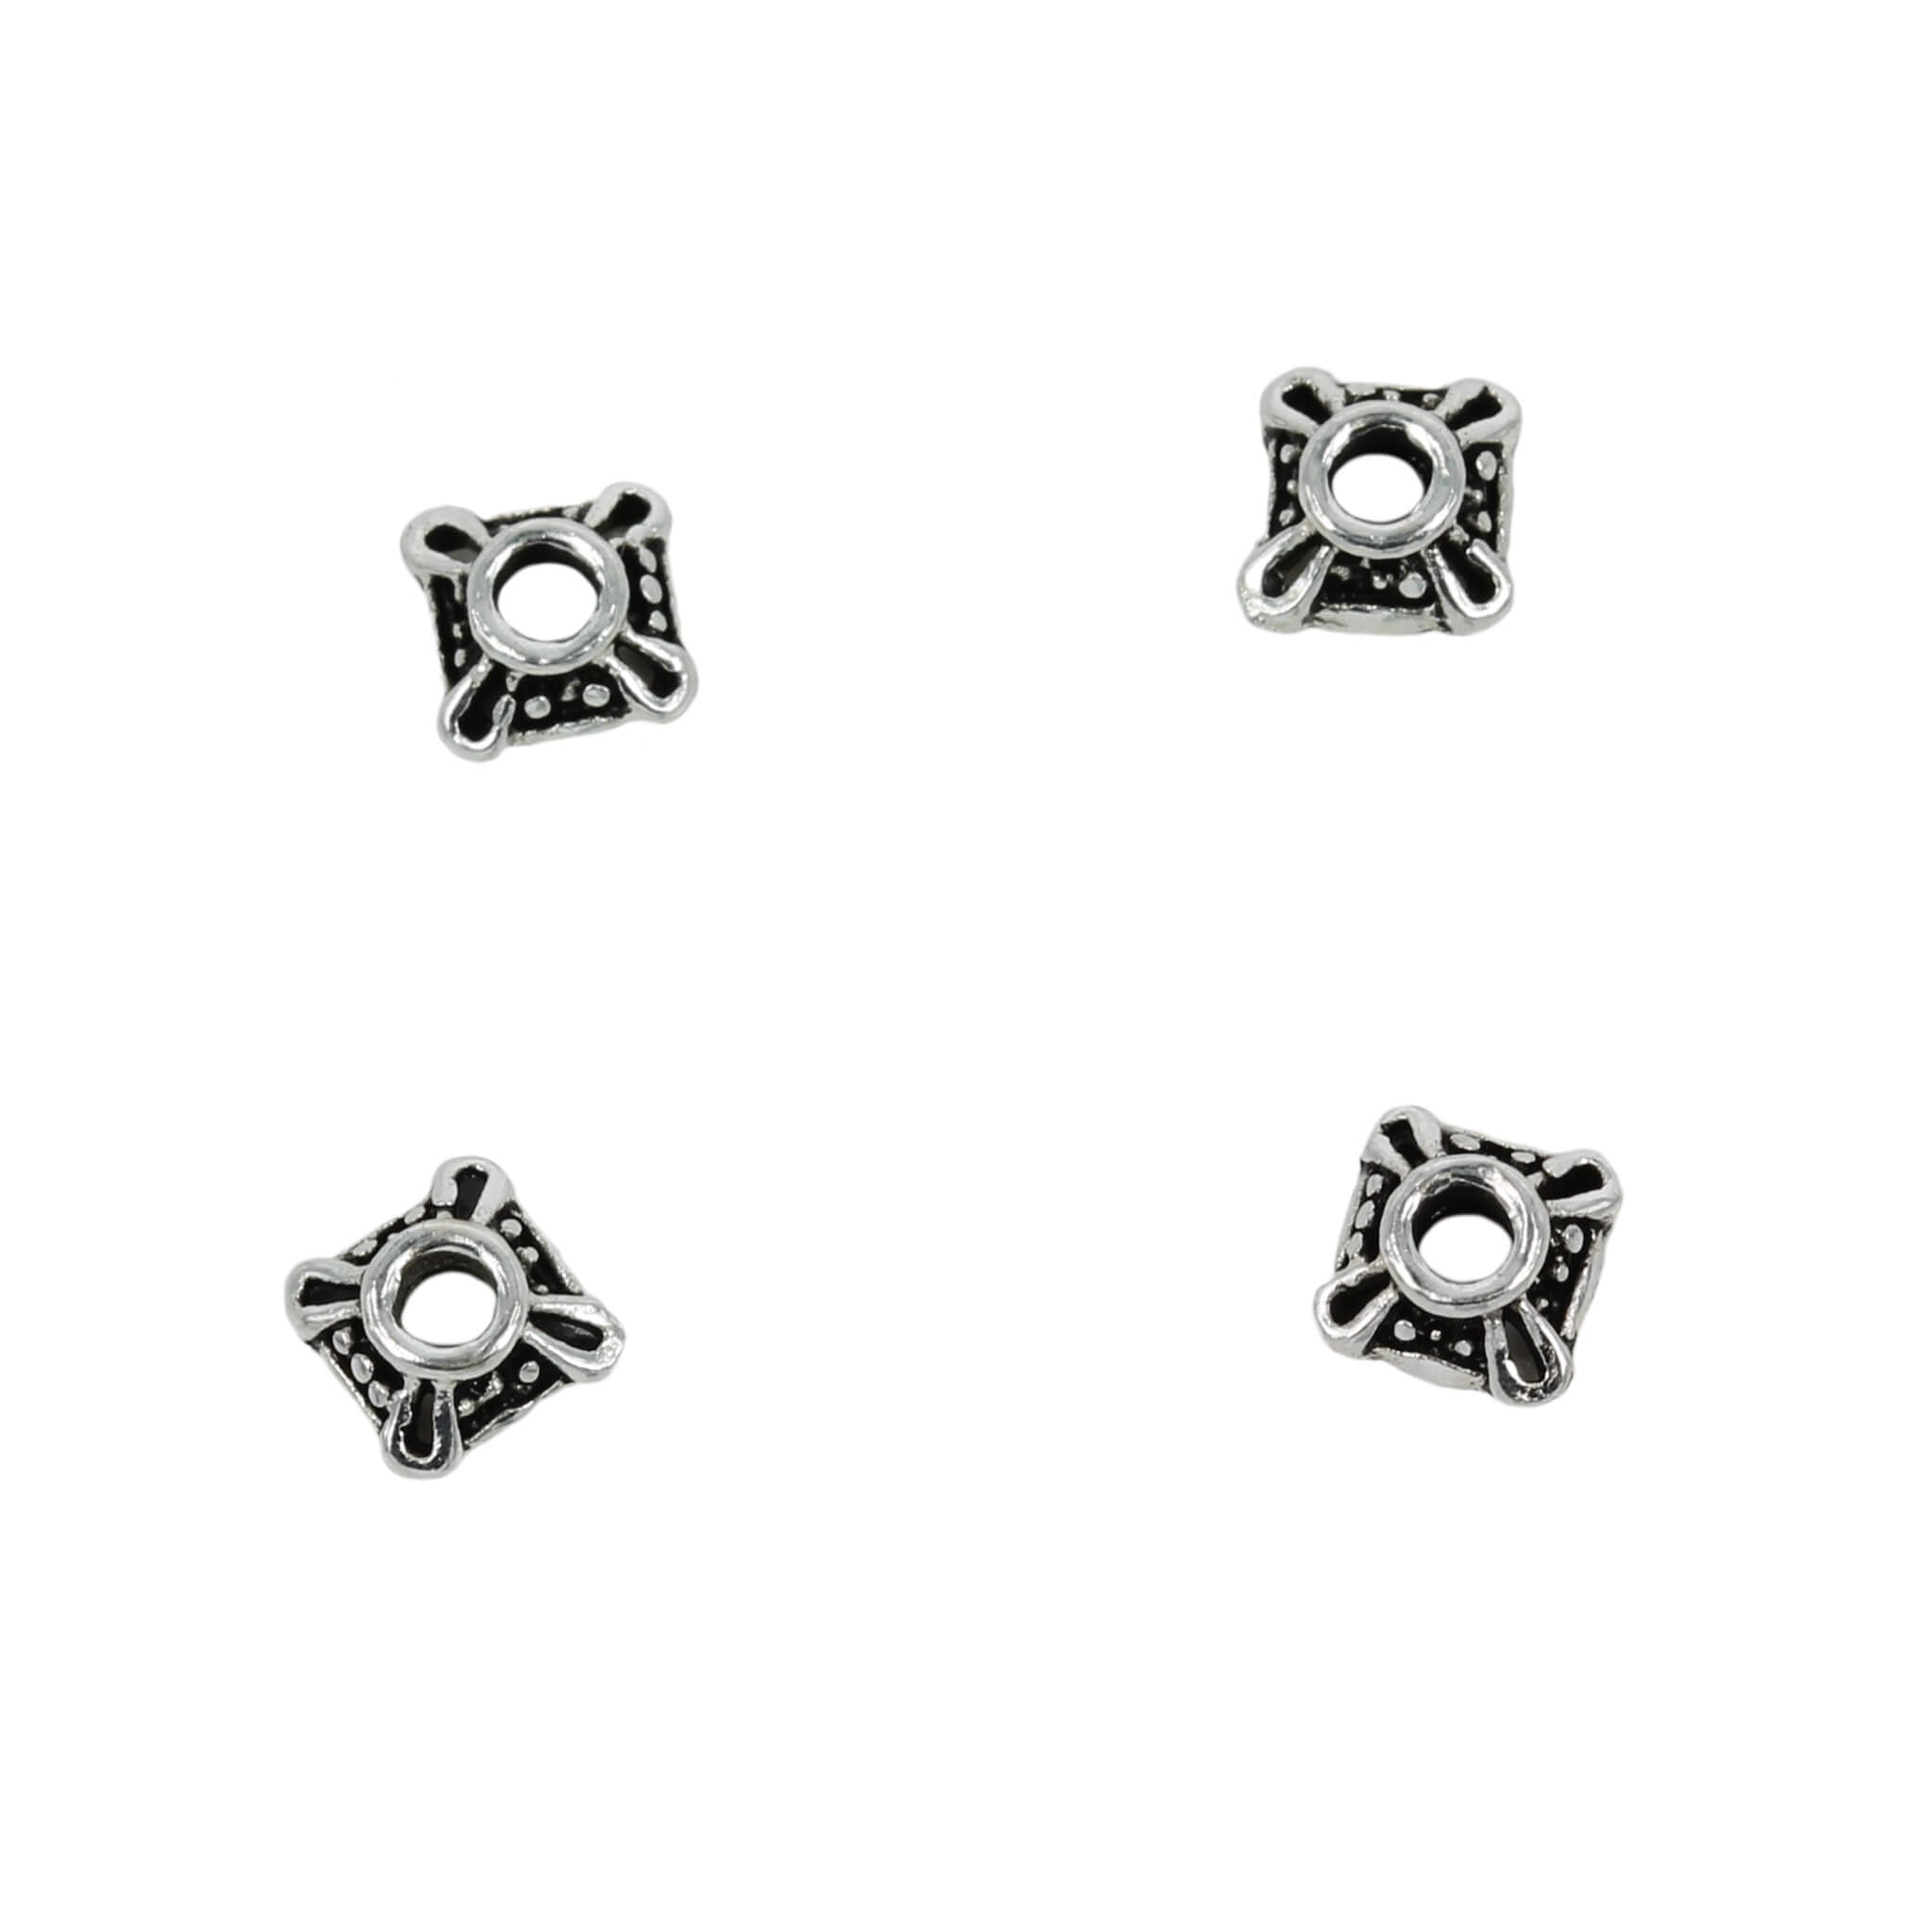 Bali-Style Square Bead Cap in Sterling Silver 5mm